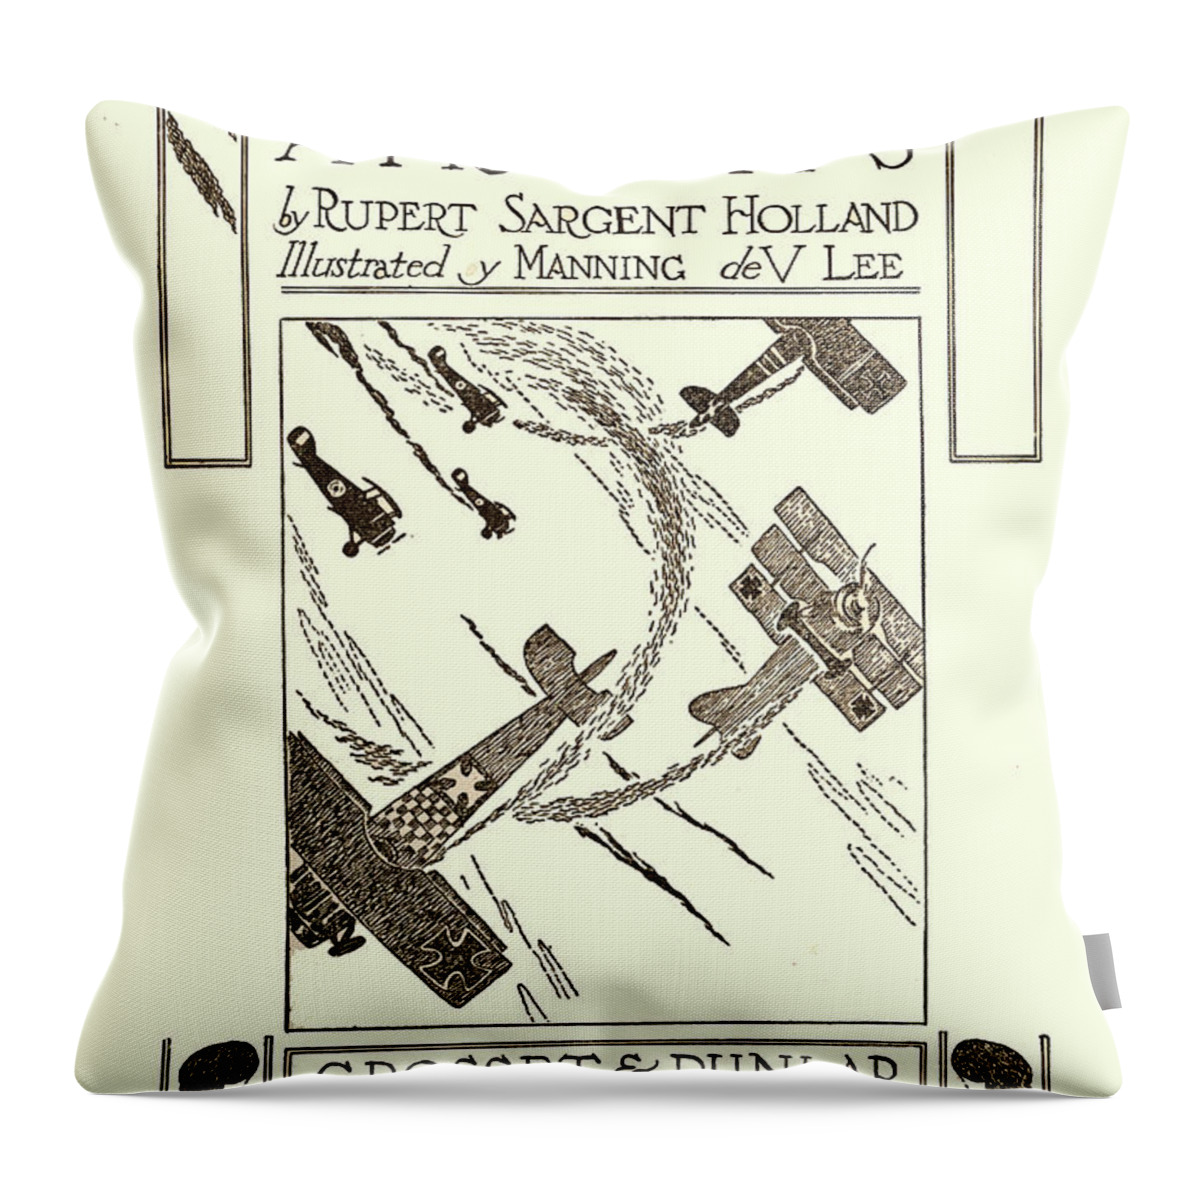 Dogfight Throw Pillow featuring the painting Historic Airships - Title Page by Manning de V lee